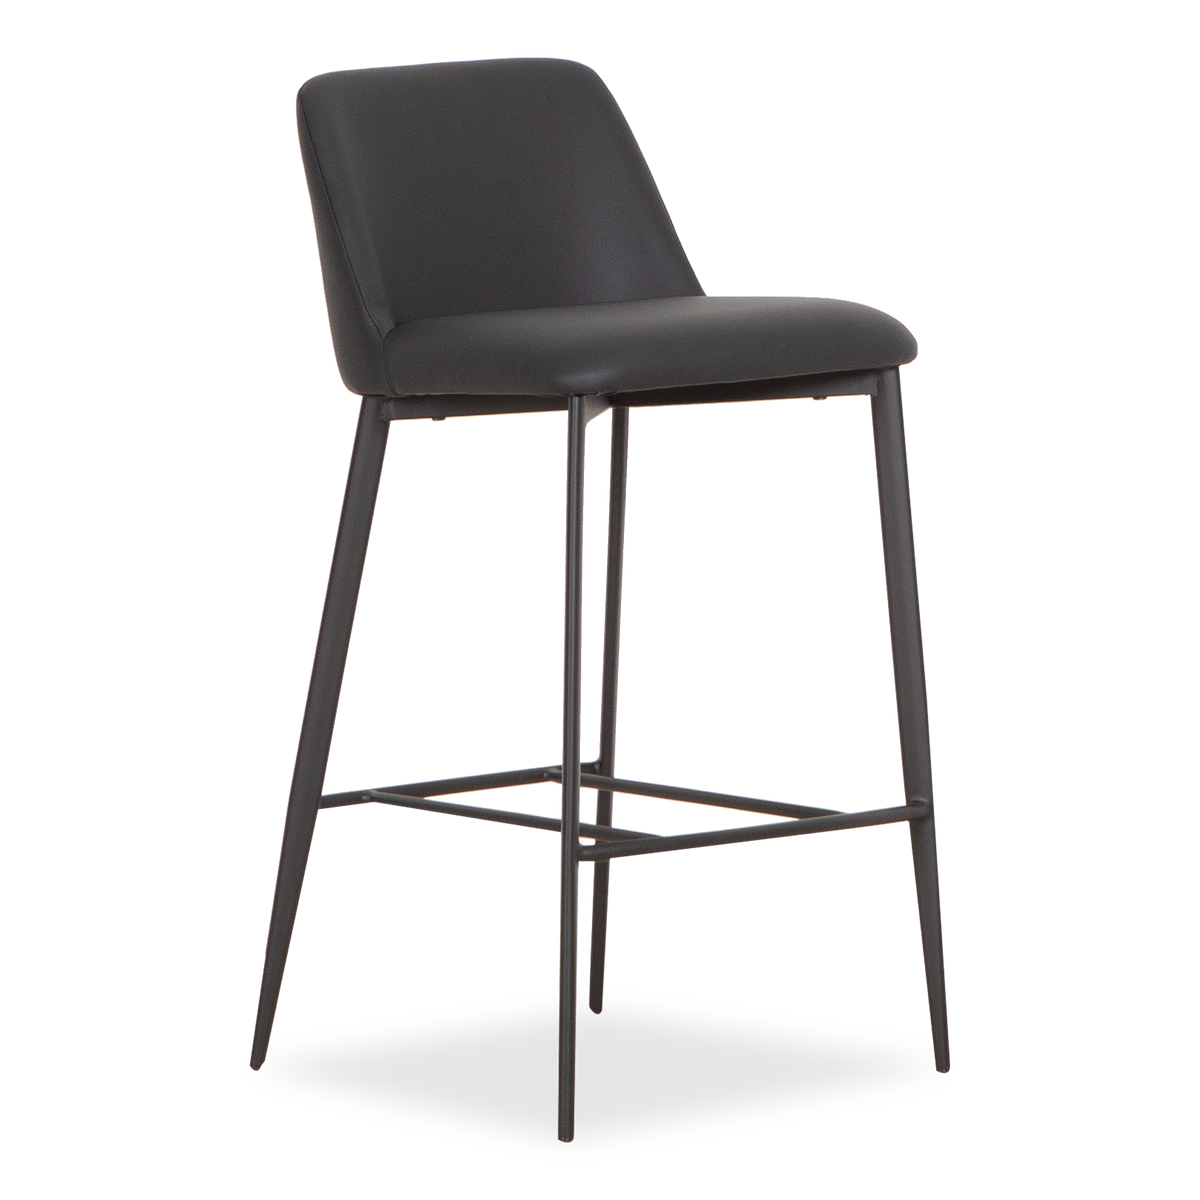 With its sharp silhouette, the Jordie Counter Stool offers an elevated versatile style.